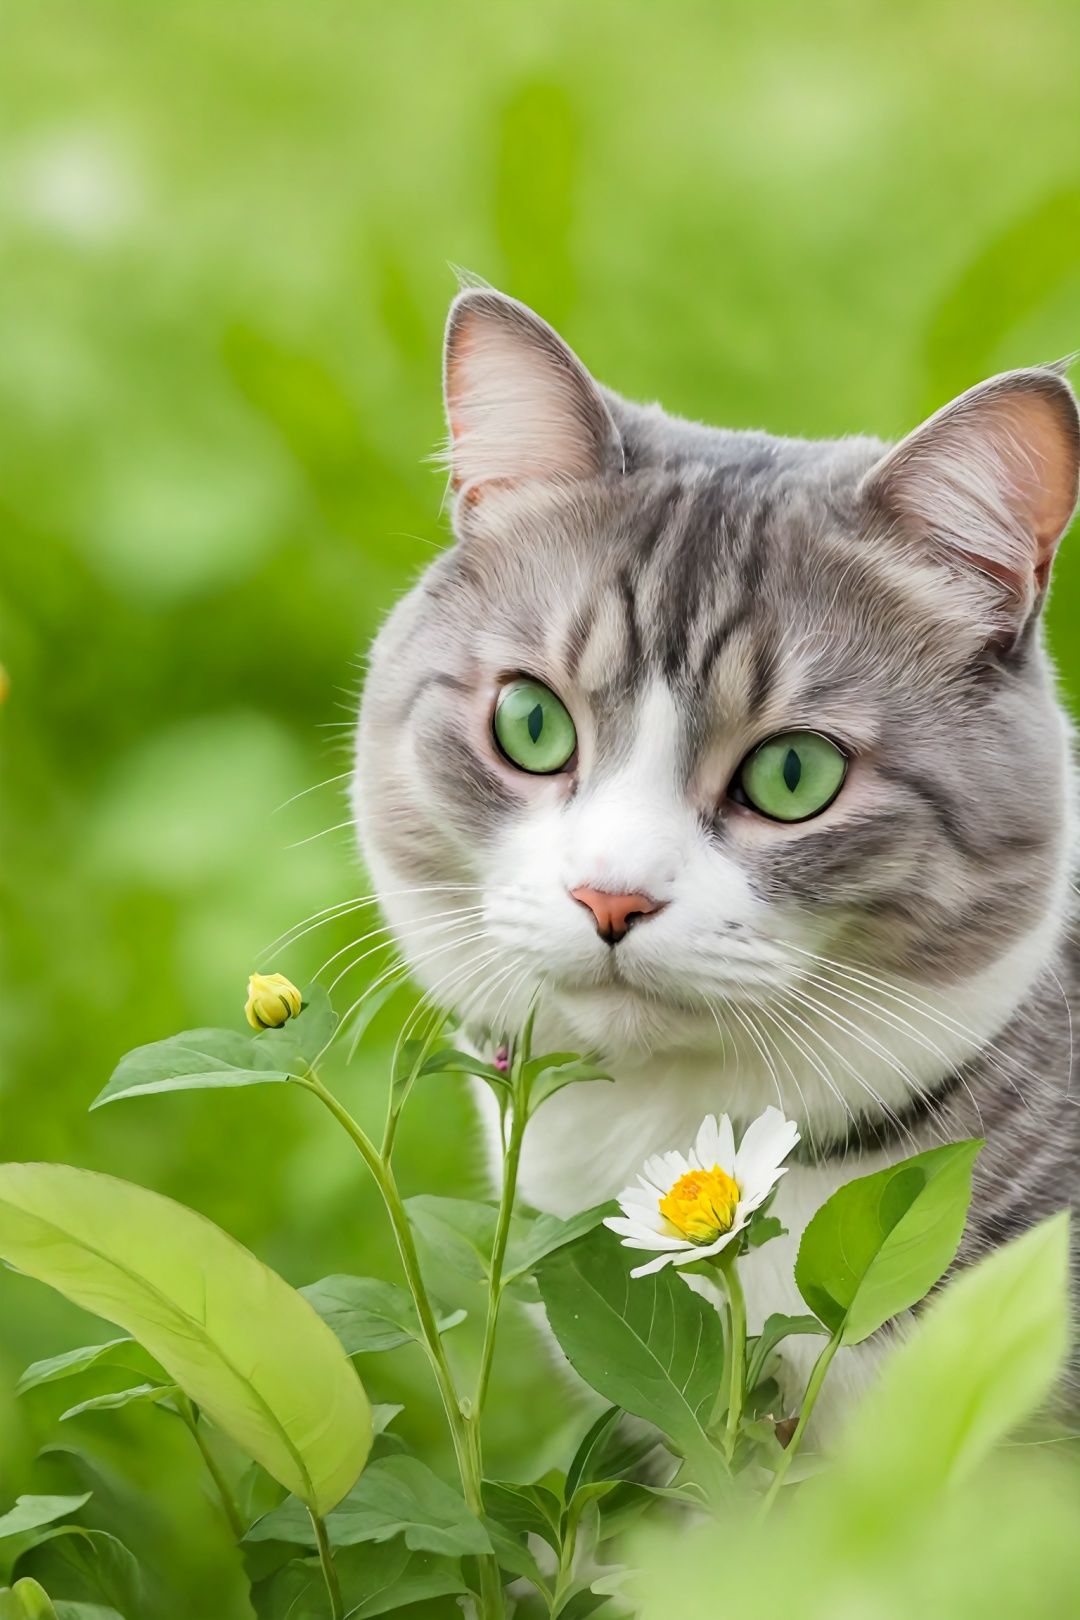 Solo, cat head, caterpillar body, green eyes, full body, flower, outdoor, no people, animals, leaves, grass, plants, animal focus, whiskers